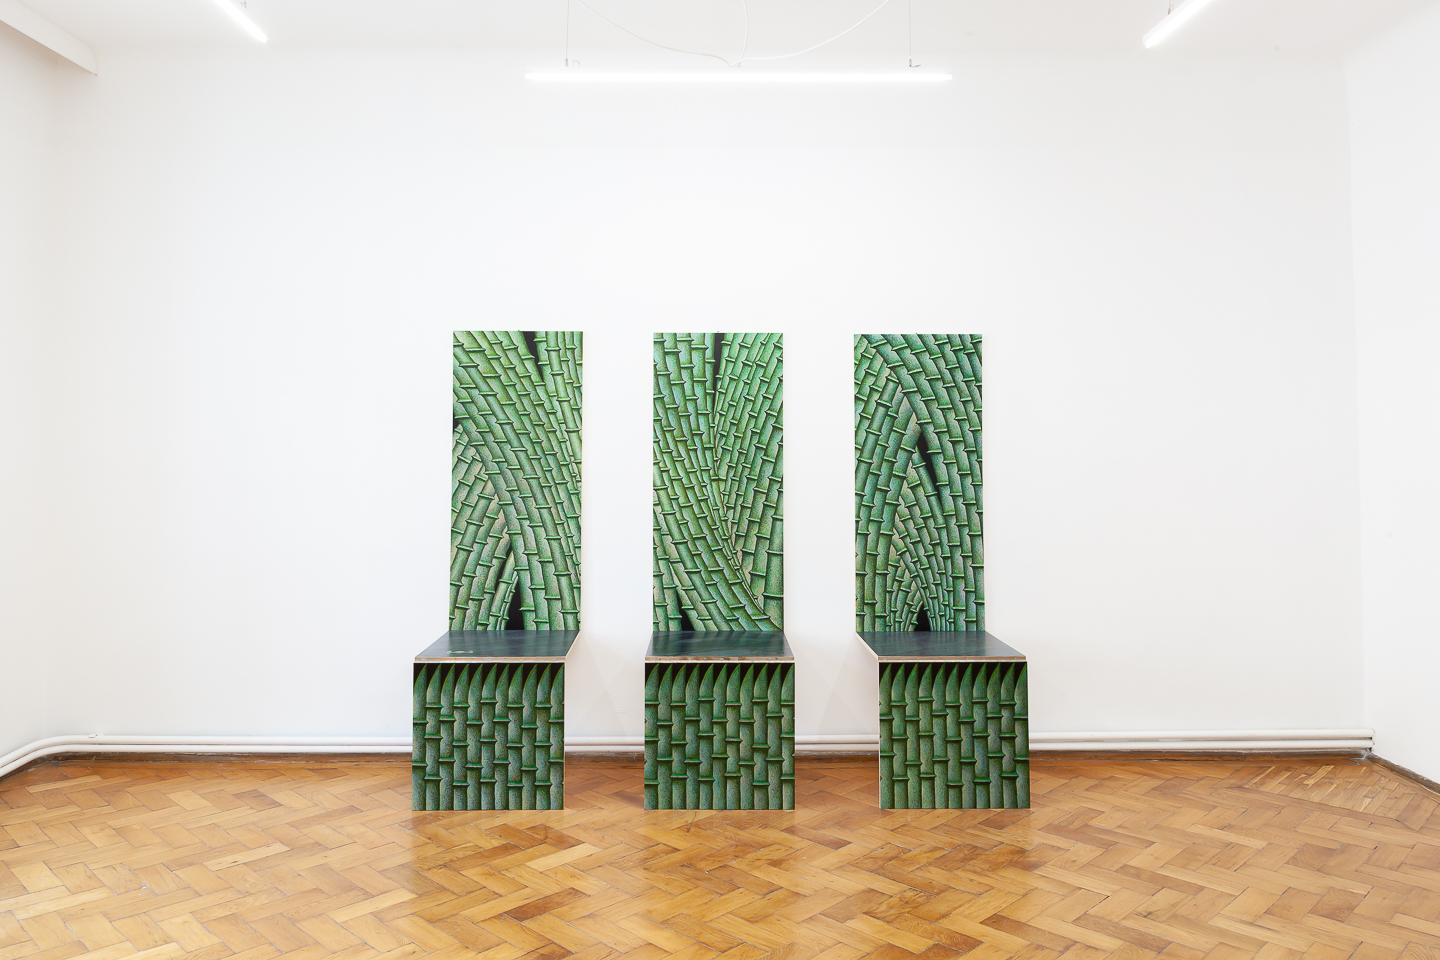 Yong Xiang Li*1991 in Changsha, China, lives and works in FrankfurtPicnic at the Bamboo Garden2021/22, Acrylic and varnish on gessoed wooden panel, hinge,240 x 164 cm Photography: Flavio Palasciano